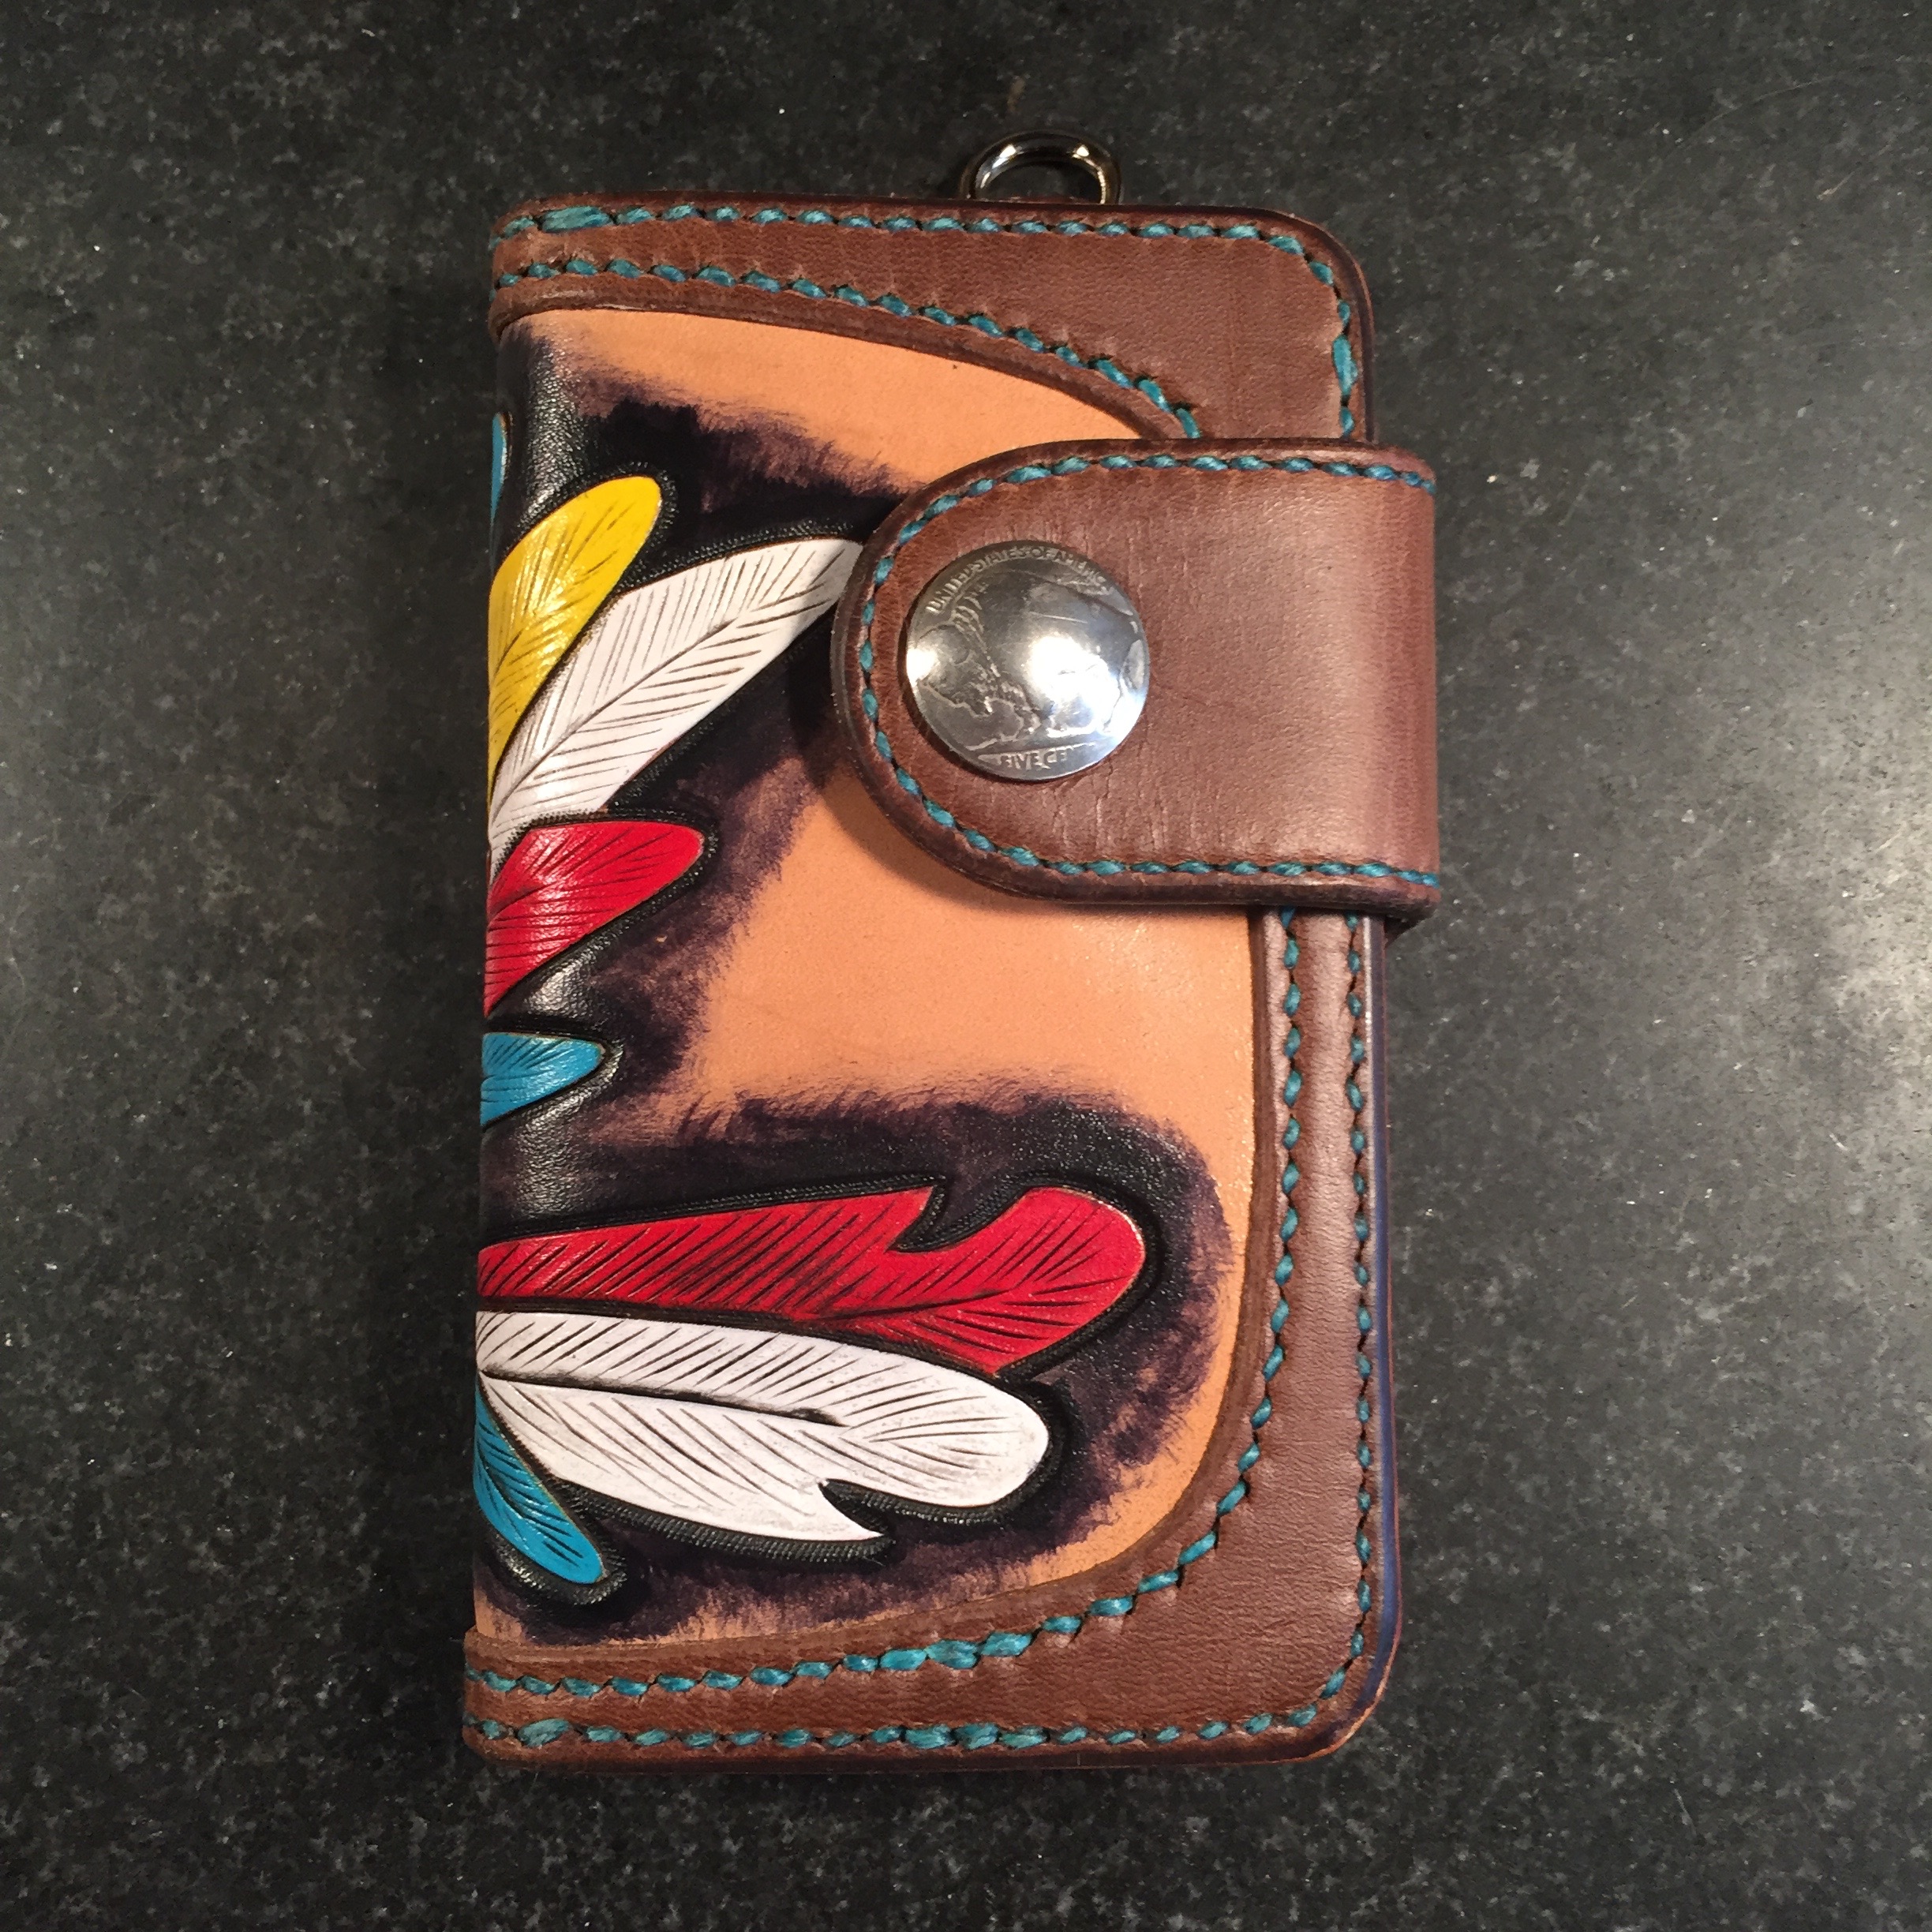 Carpenter Bee - Inlaid, Tooled, or Tooled and Inlaid Snap Wallet ...